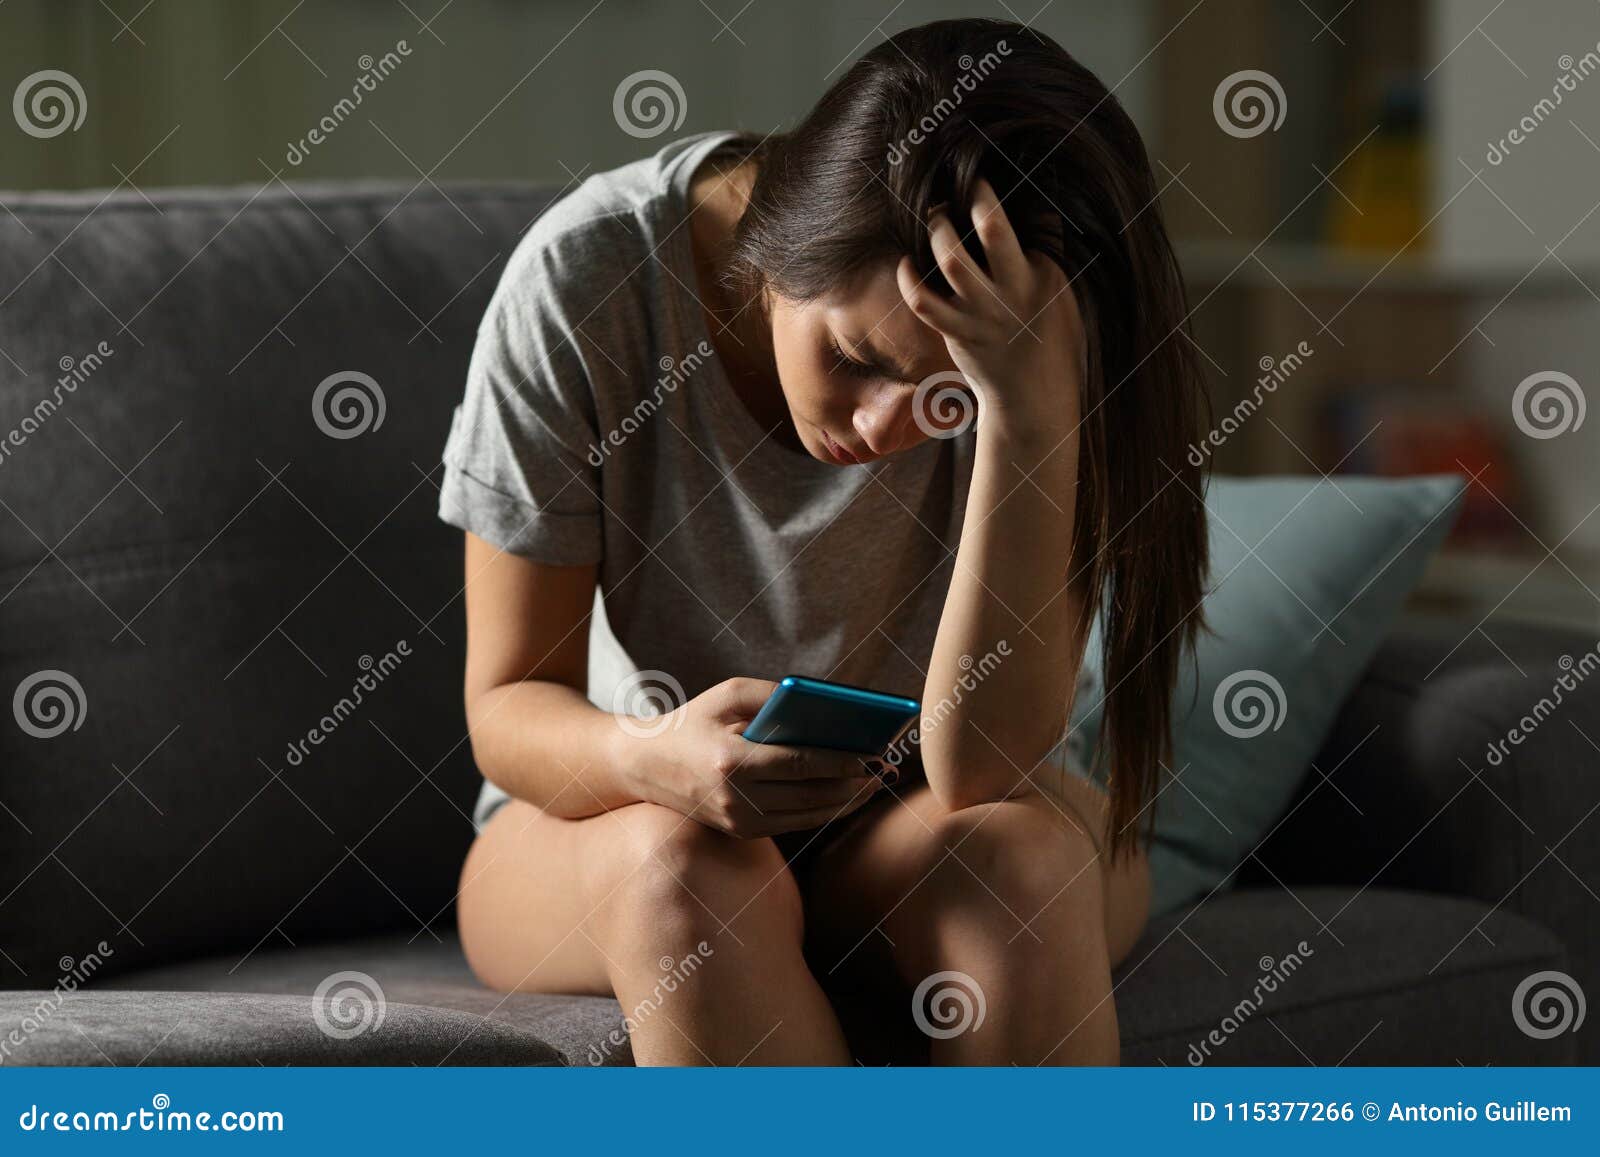 sad teen being victim of cyber bullying online